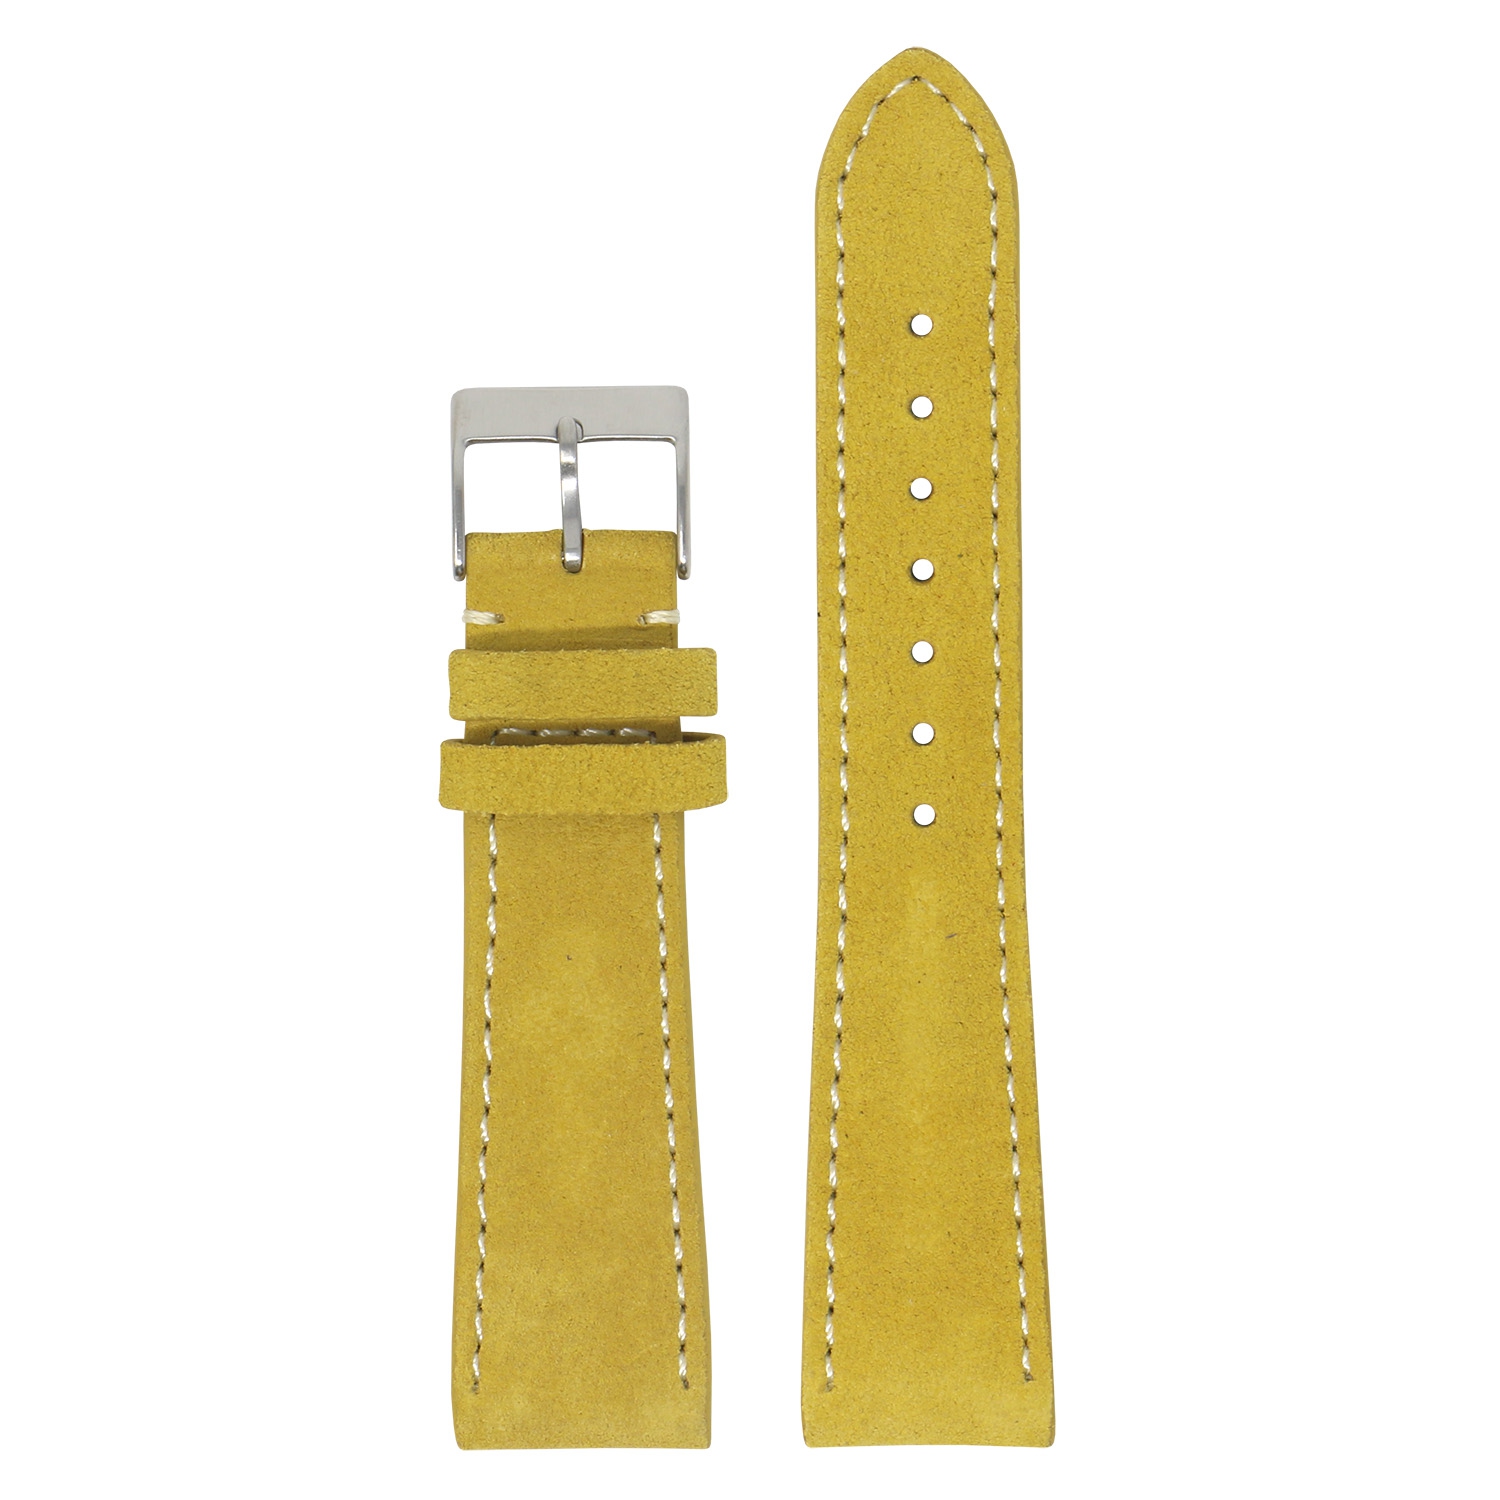 StrapsCo Classic Suede (Short, Standard, Long) Watch Band Strap for Samsung Galaxy Watch 3 - Short Length - 20mm - For 41mm Galaxy Watch3 - Yellow